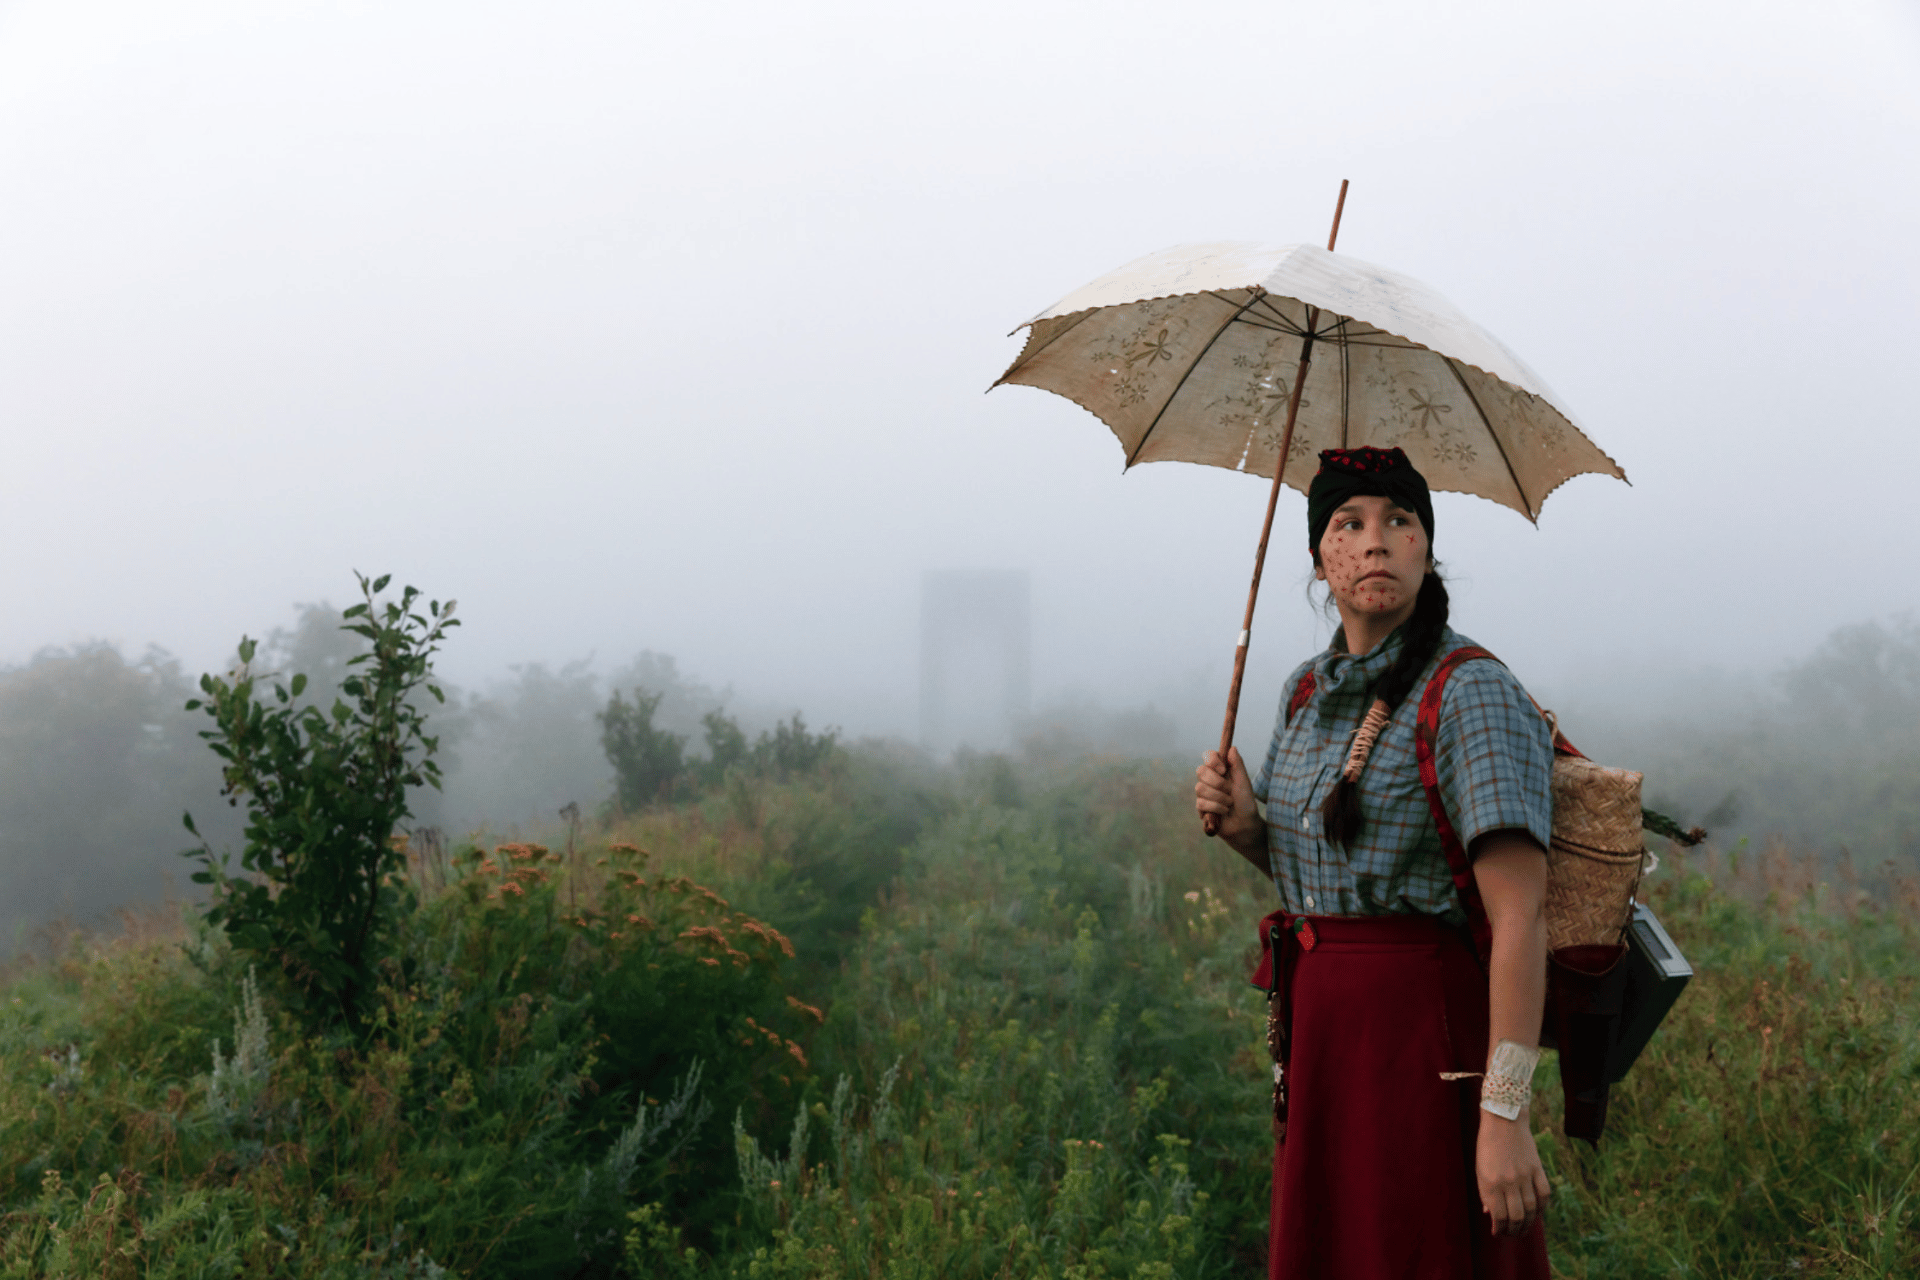 A person stands in a foggy field holding an ornate umbrella. They are wearing a plaid shirt, red skirt, and headscarf, with a basket strapped to their back and foliage in the background.